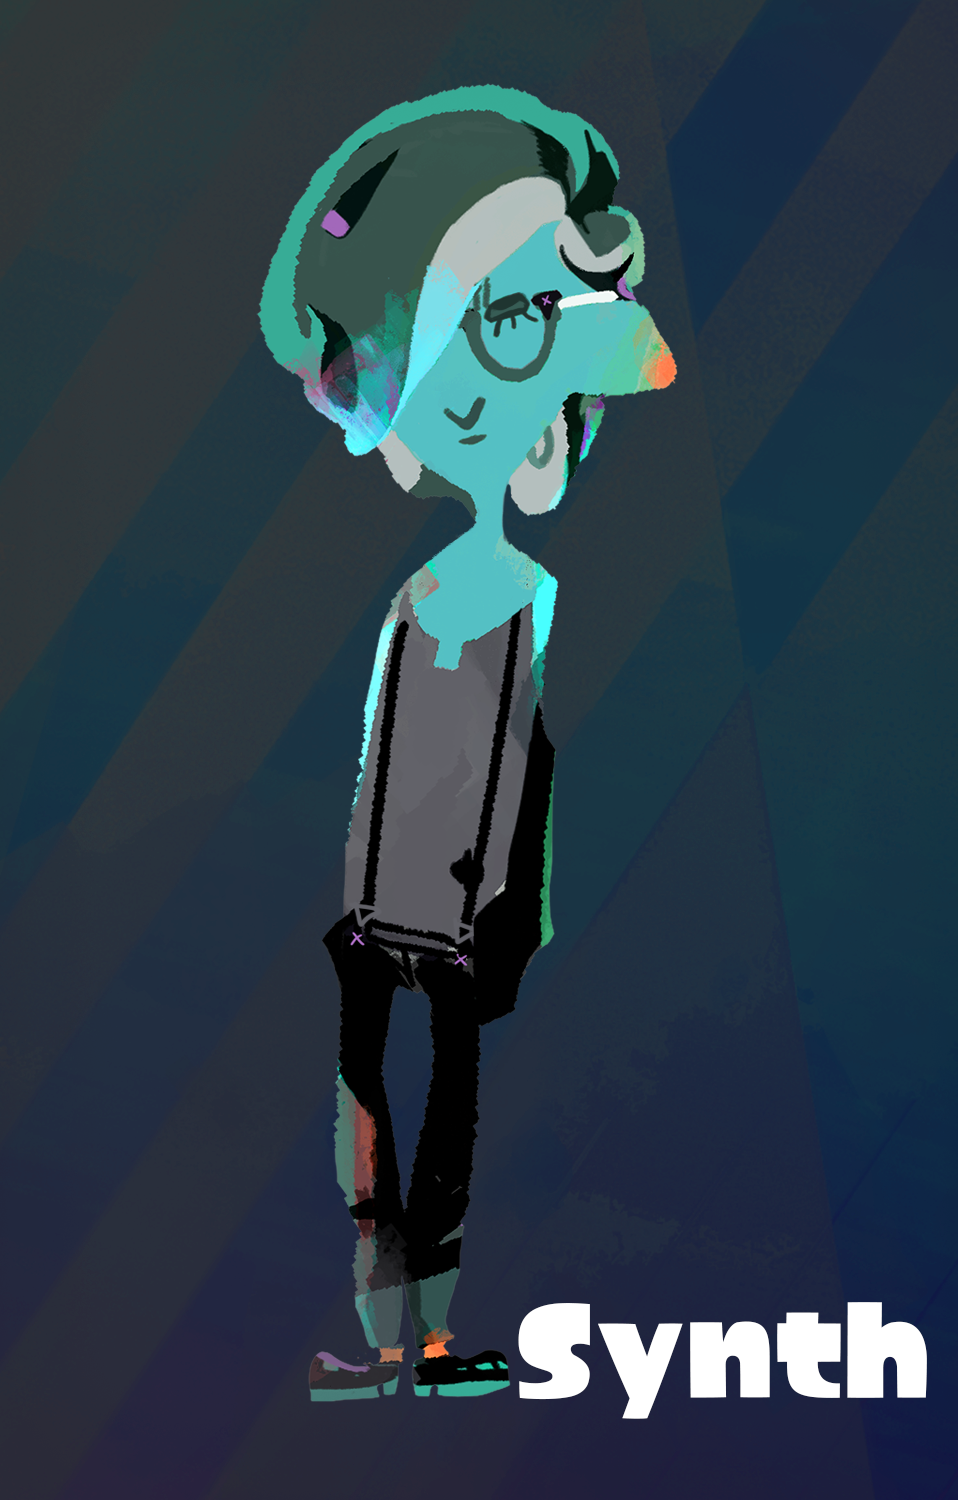 Let’s meet the members of Wet Floor. This guy plays synthesizer and is the group’s founder. He’s out to restore some indie dignity to Inkopolis’s music scene that’s lately been taken over by giant pop stars. When it comes to songwriting, he lets...